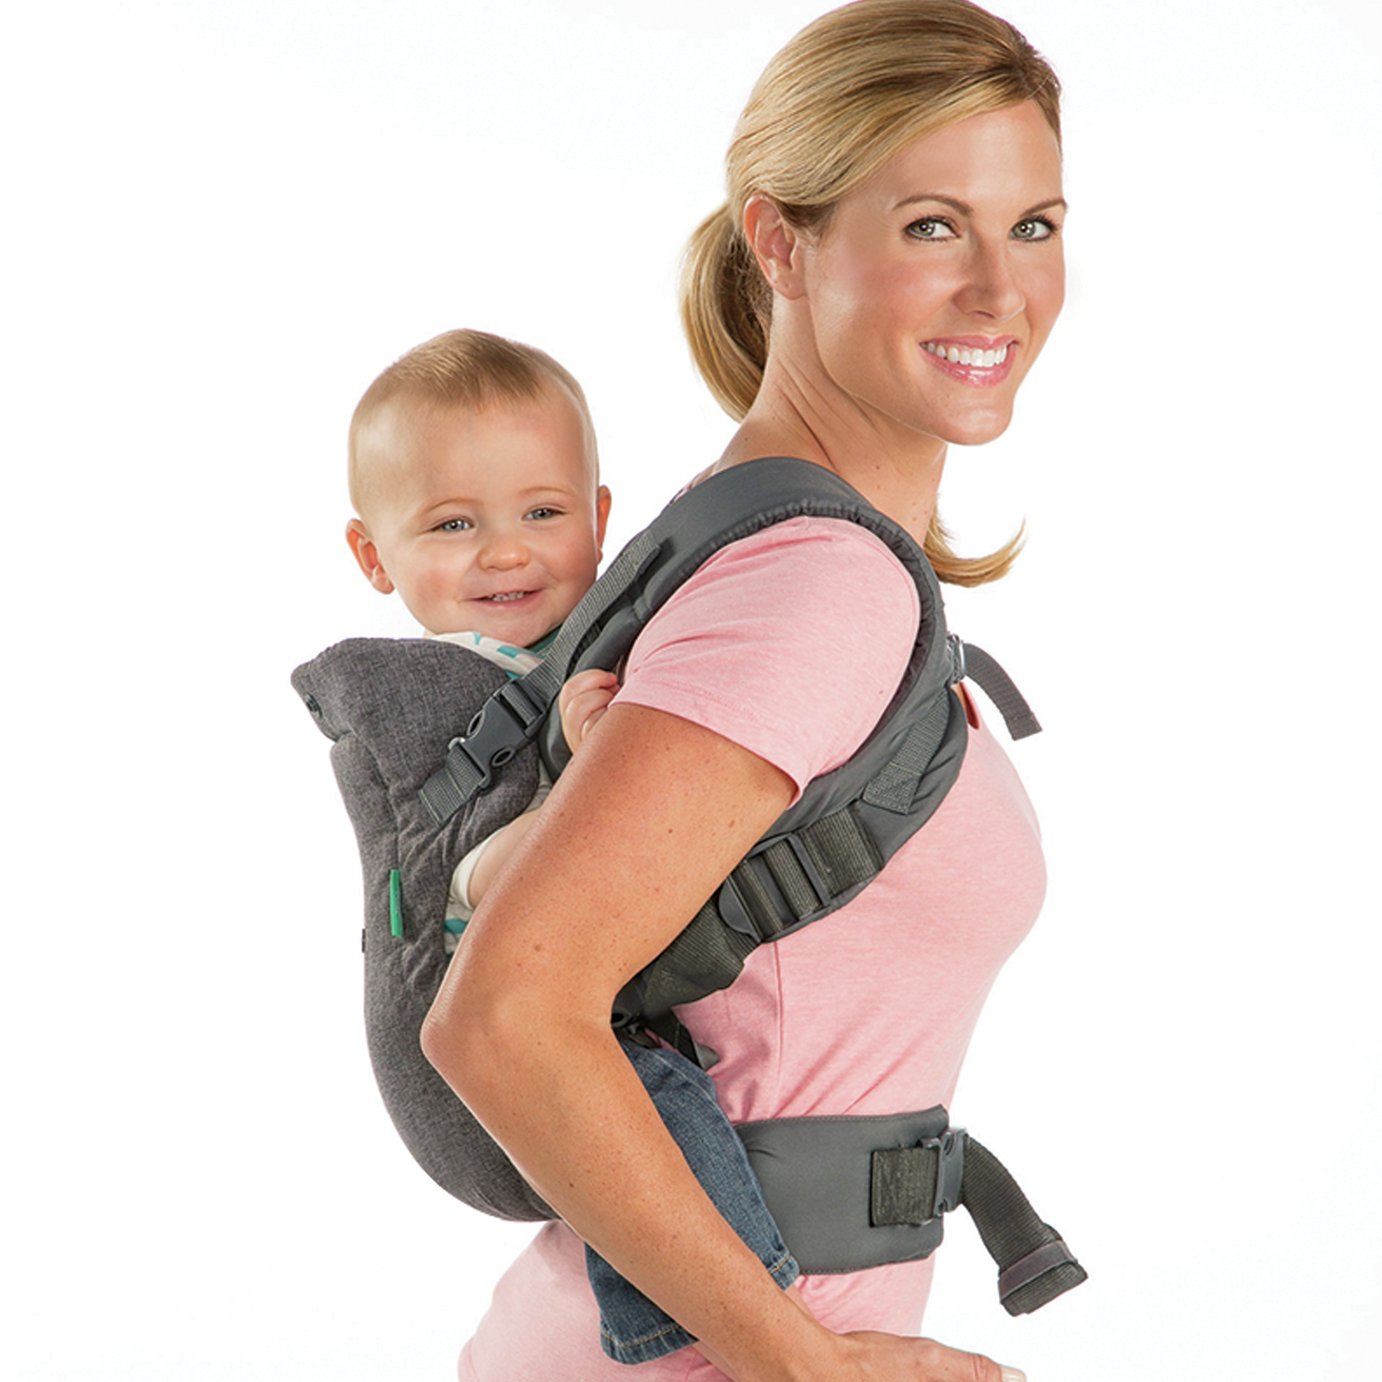 Infantino Flip Ergo 4-in-1 Baby Carrier Review